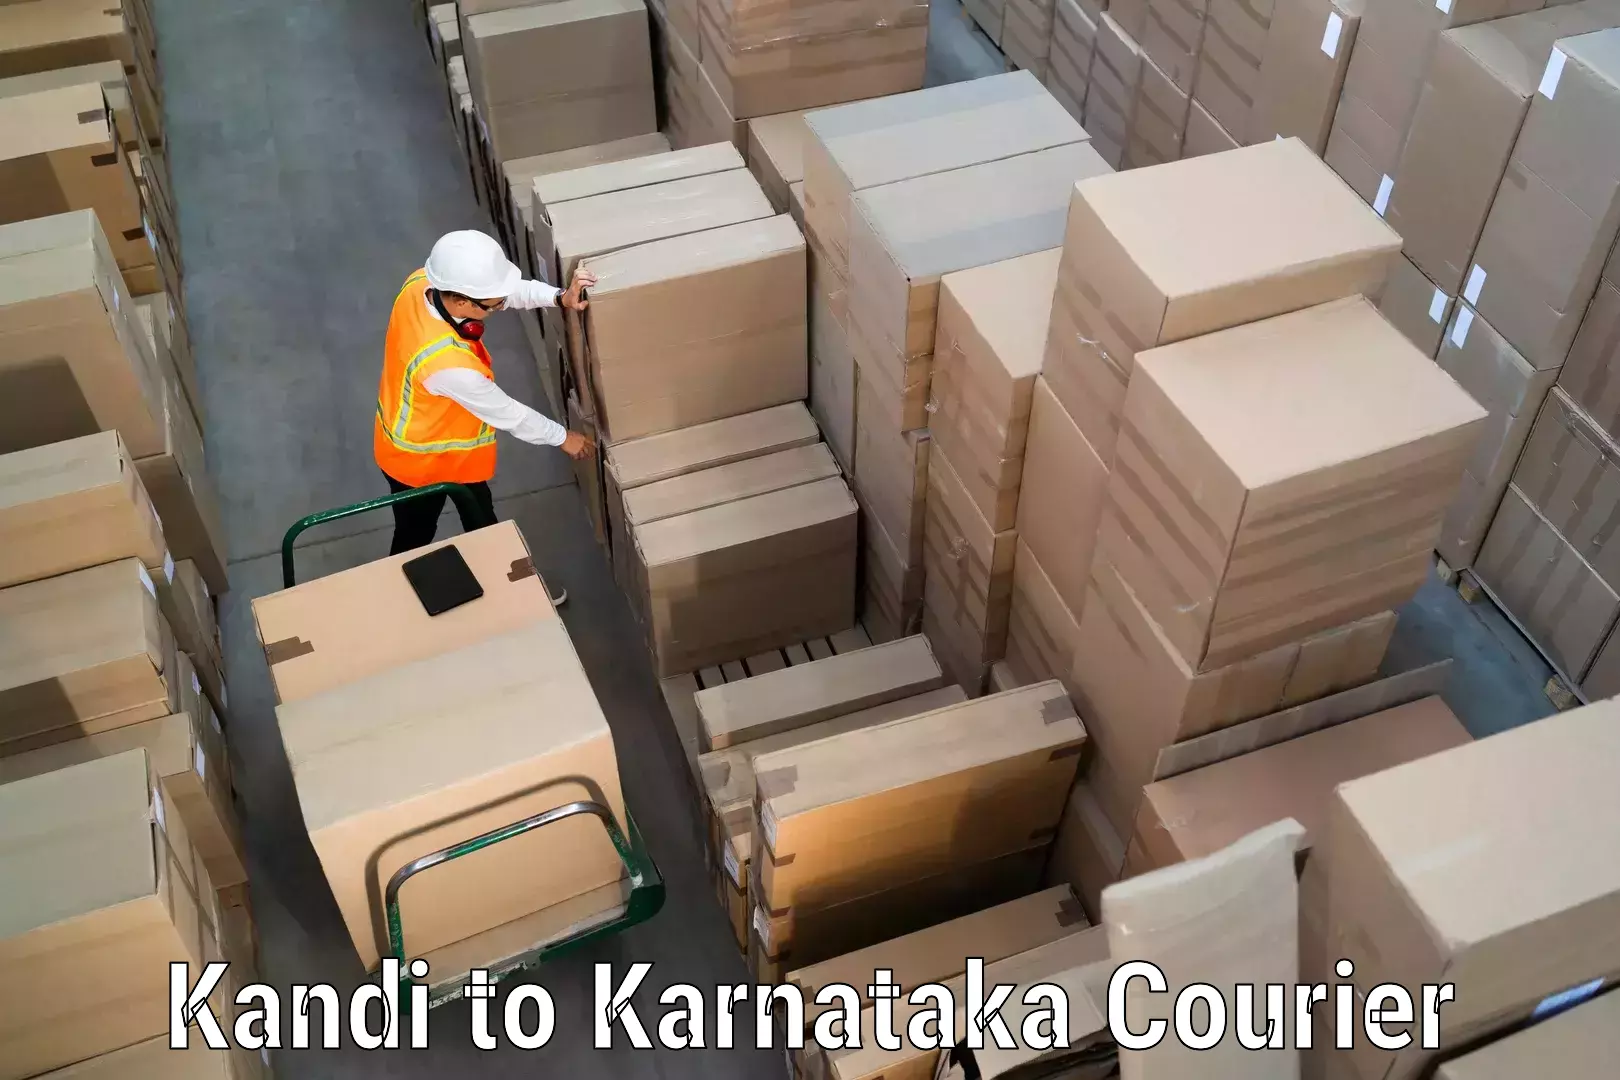 Easy access courier services in Kandi to Bhalki